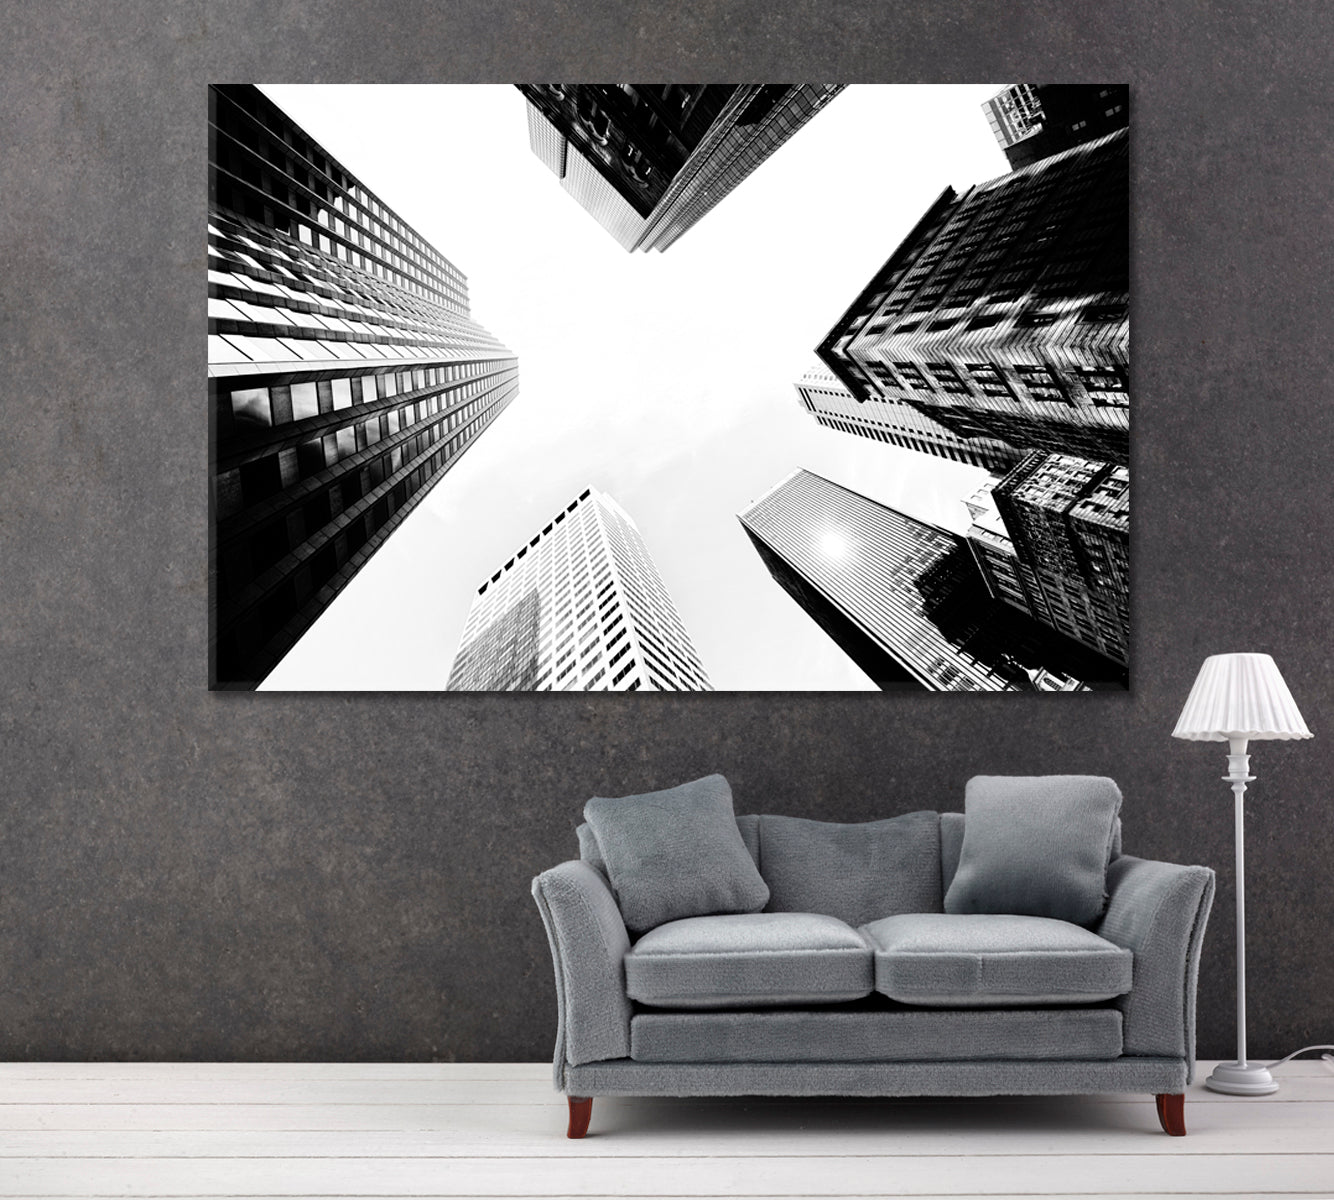 Skyscrapers in Black and White Canvas Print ArtLexy 1 Panel 24"x16" inches 